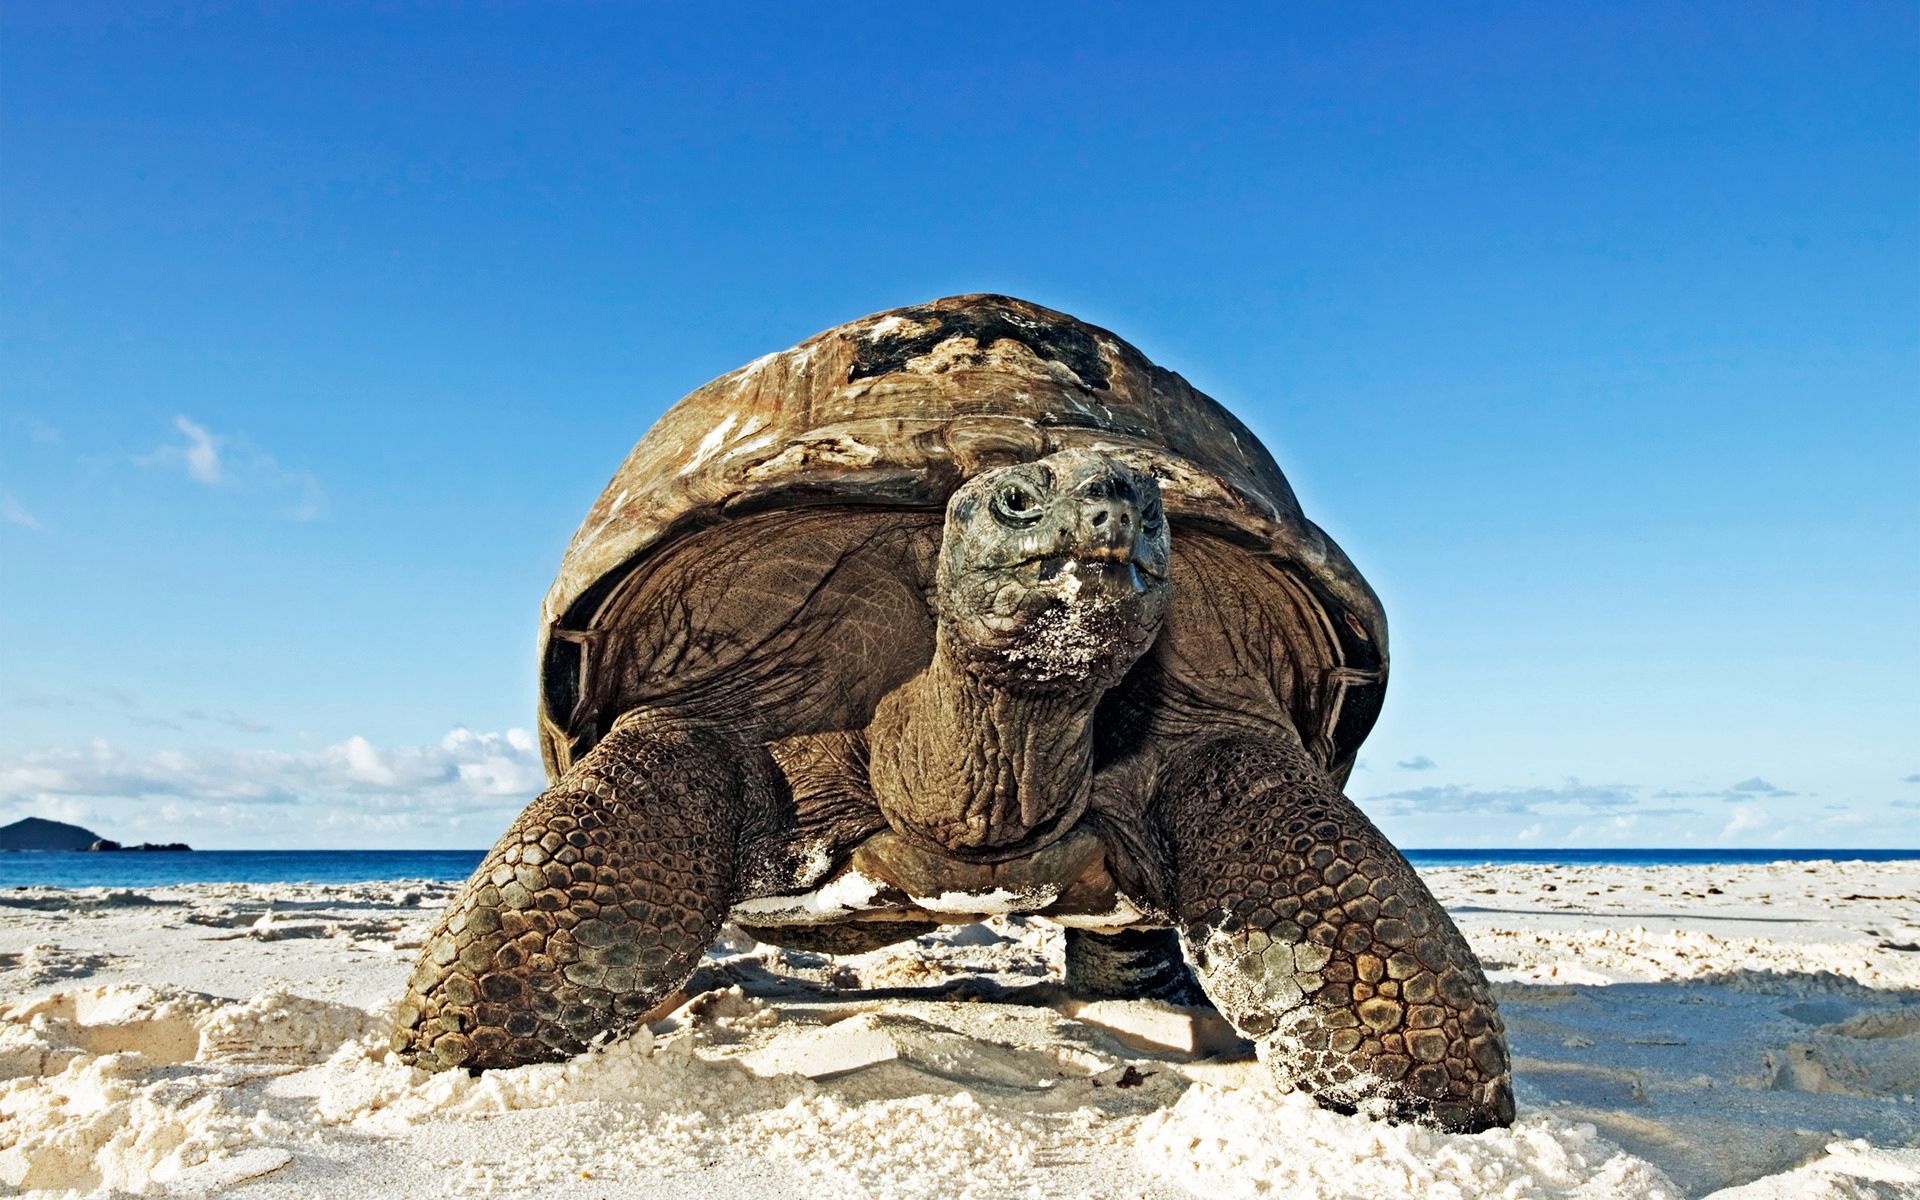 carapace, animals, sand, shell, turtle